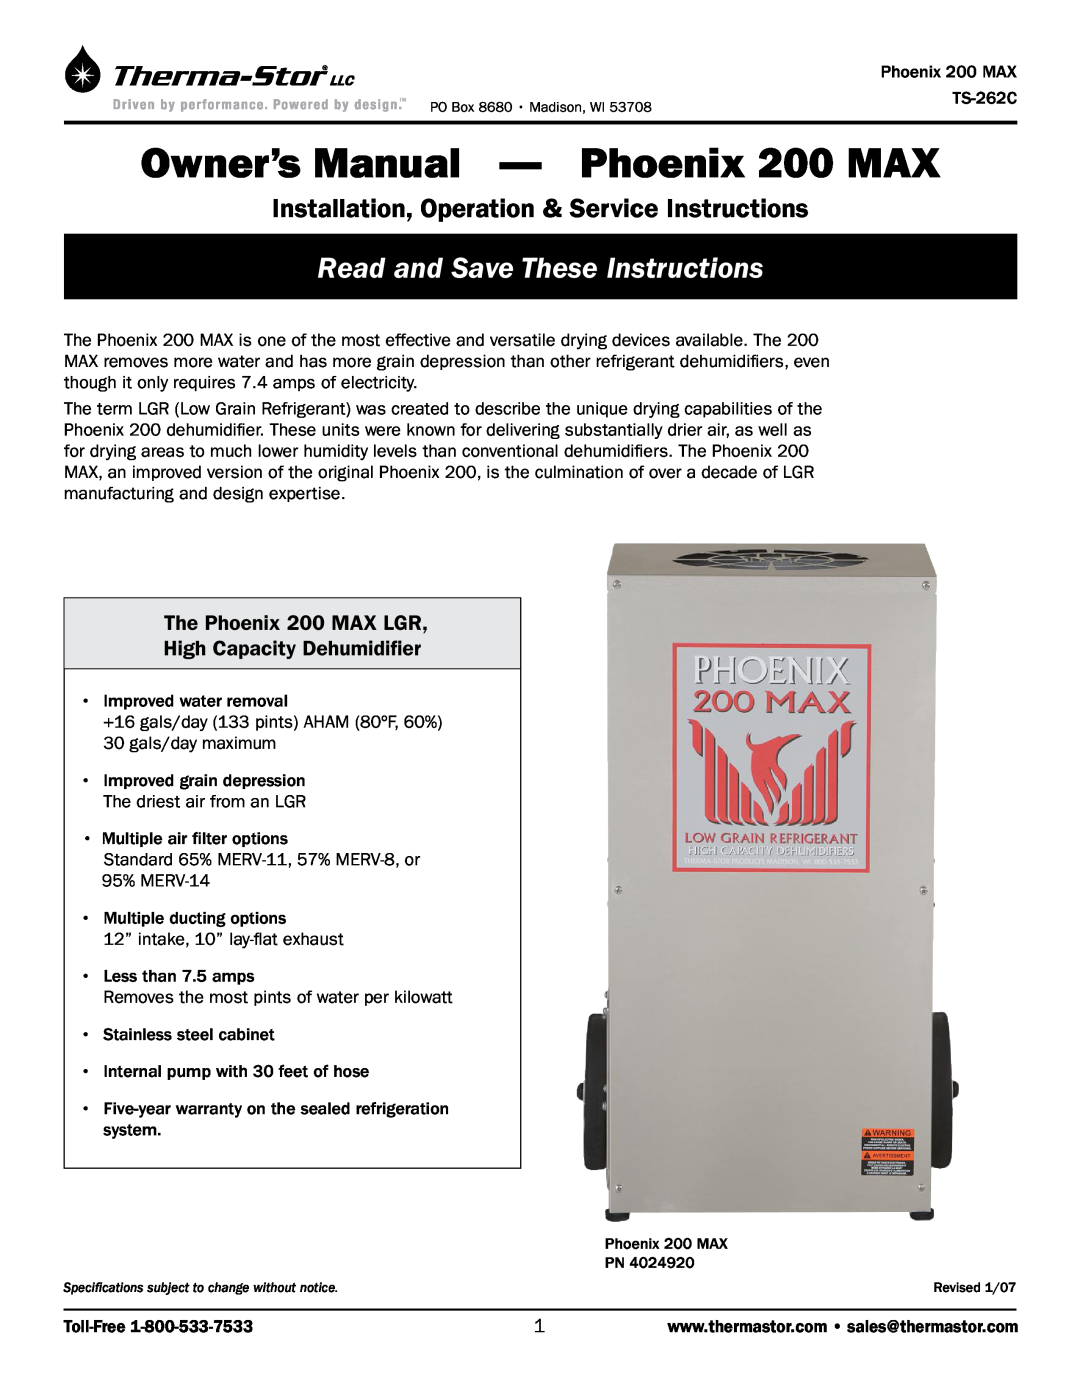 Therma-Stor Products Group owner manual The Phoenix 200 MAX LGR, High Capacity Dehumidifier 